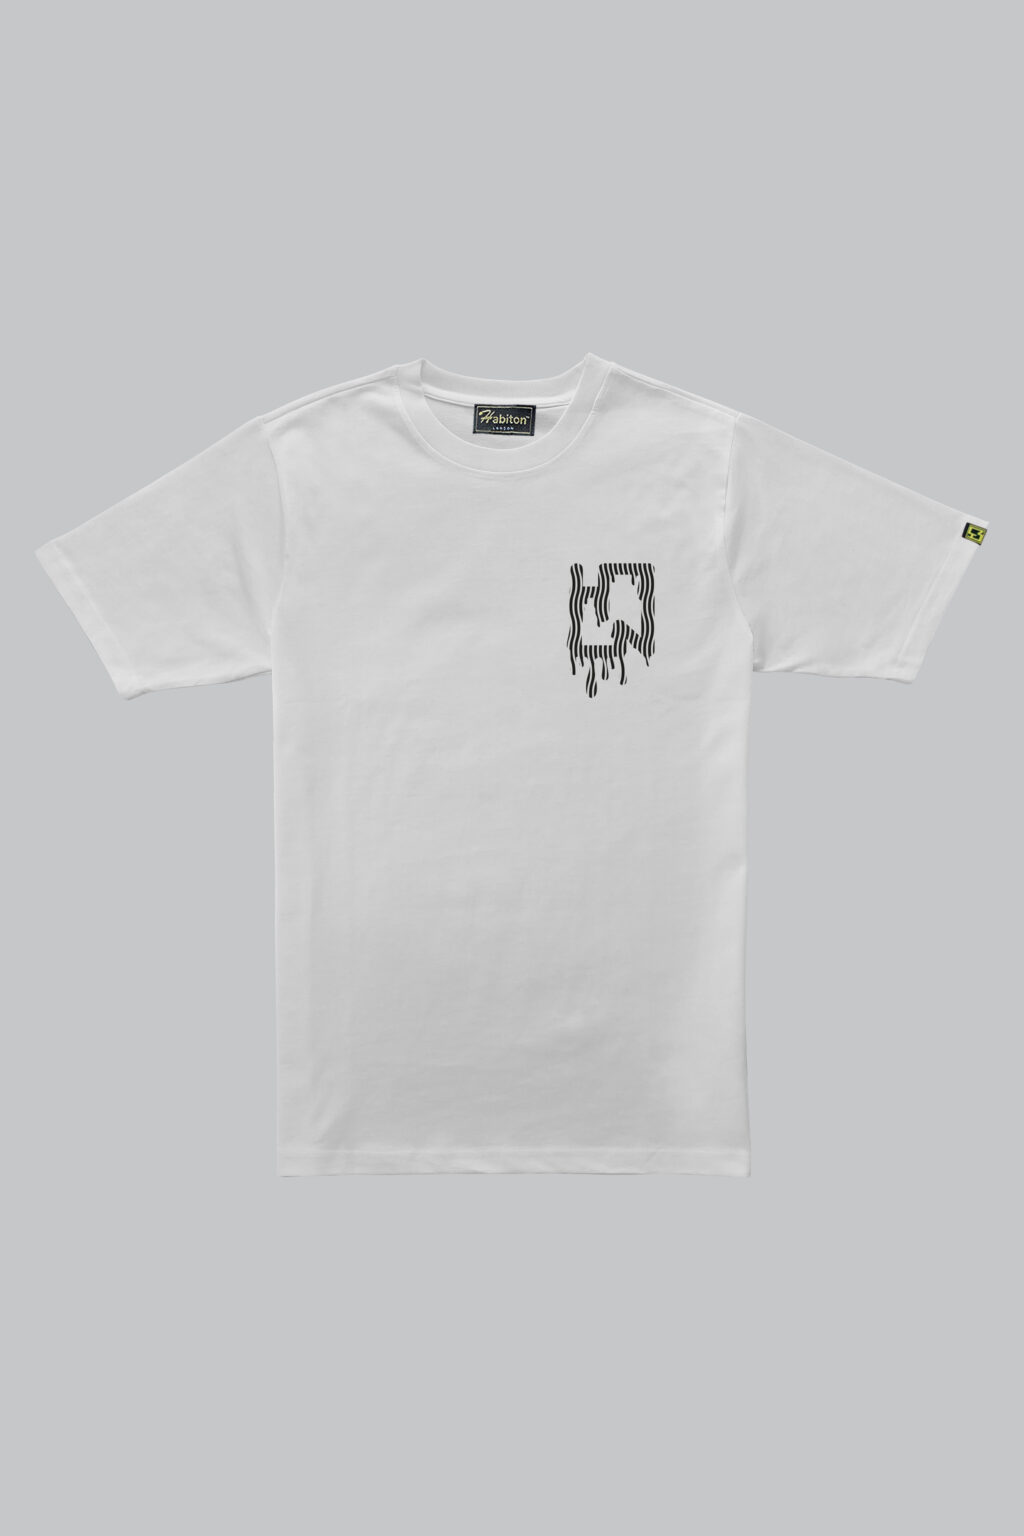 Habiton ™ London is a motivational and streetwear brand.